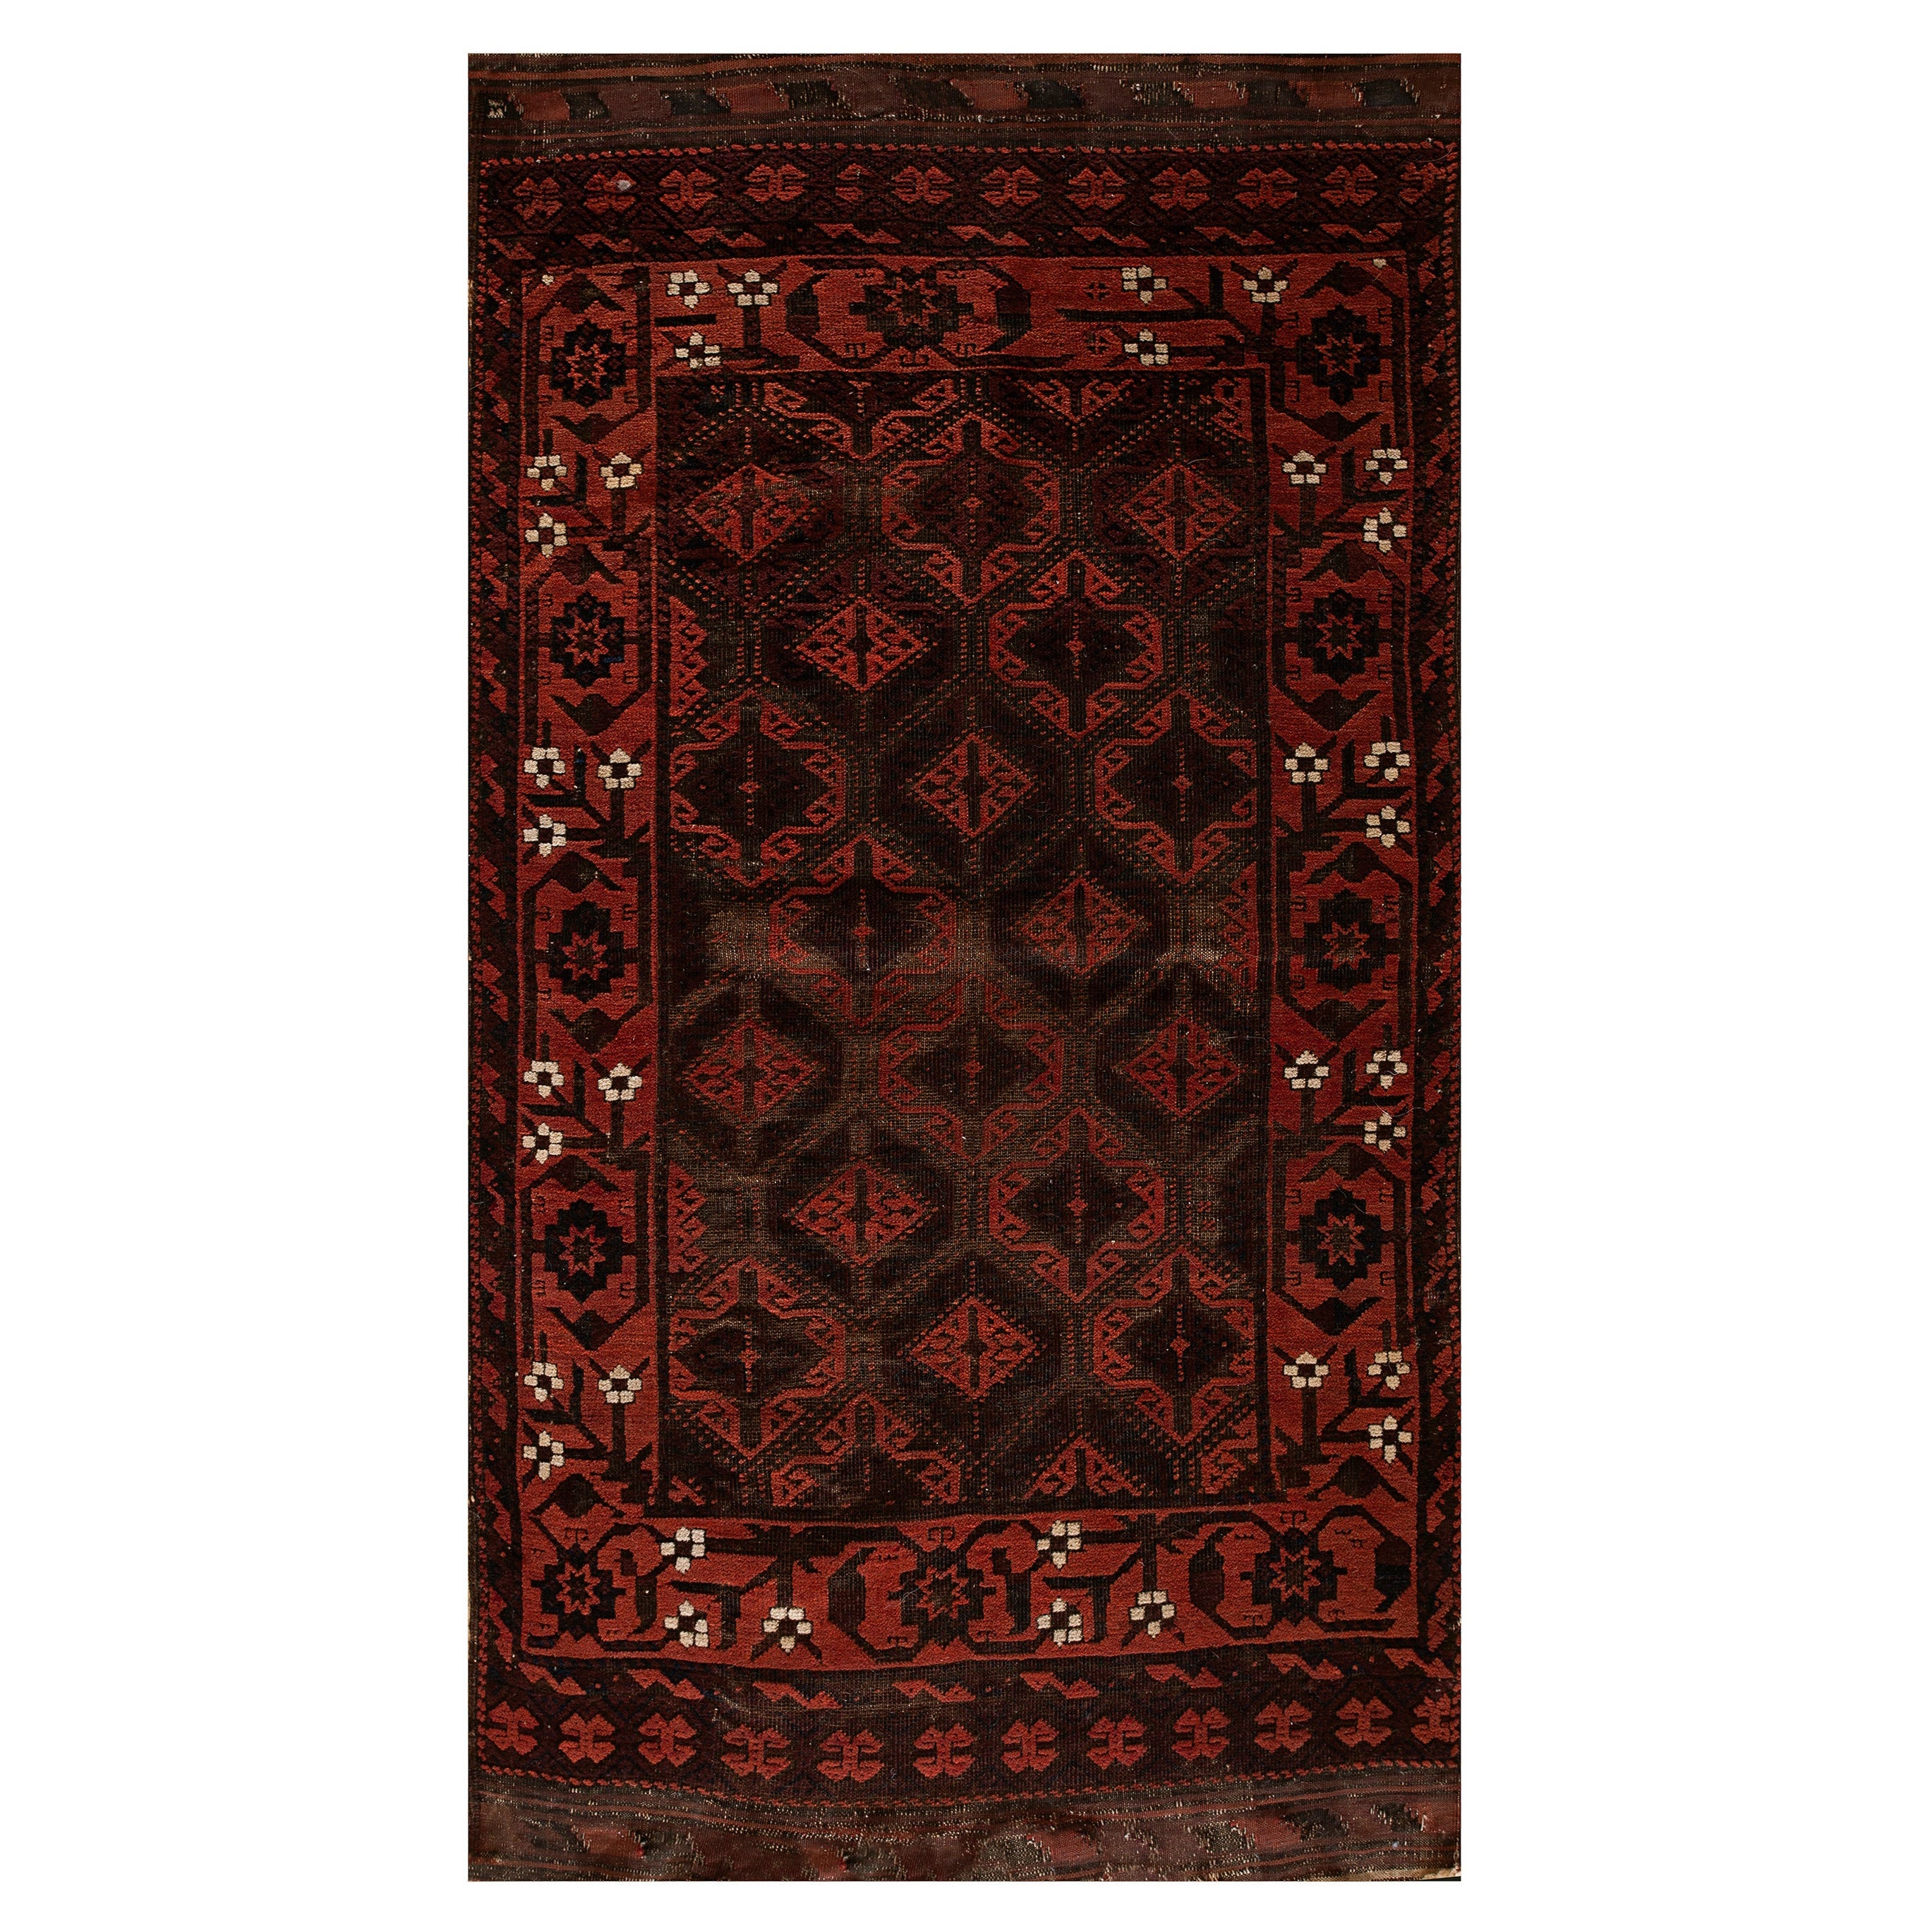 Late 19th Century Persian Baluch Carpet ( 2'8" x 5'2" - 82 x 157 cm ) For Sale